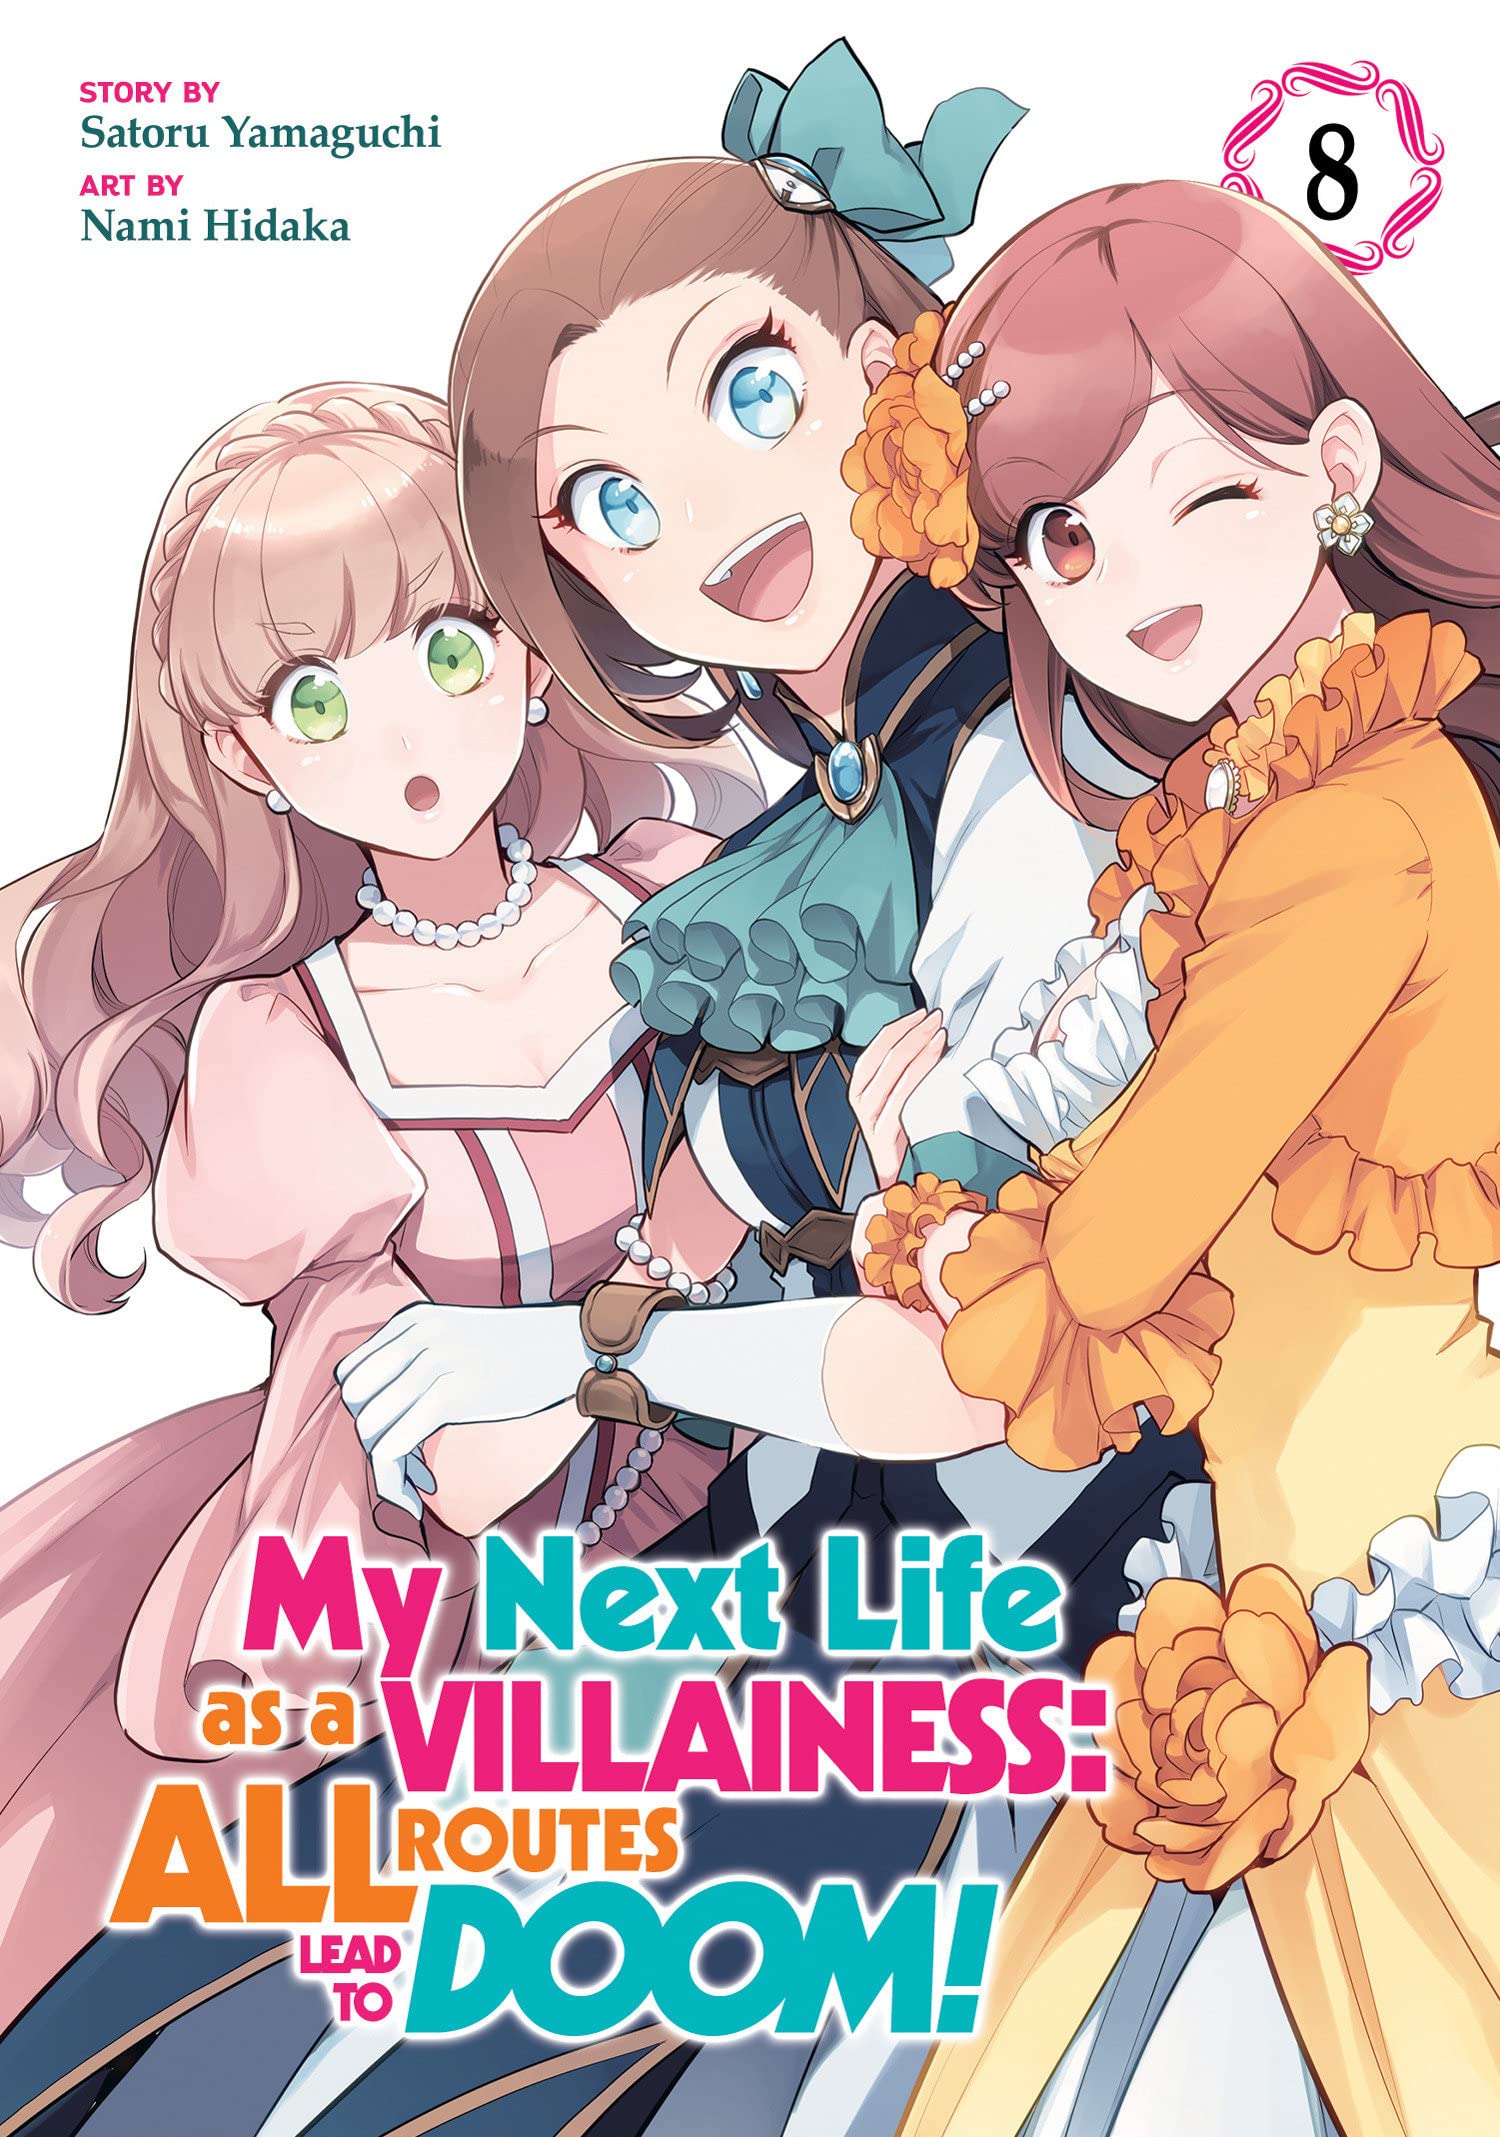 My Next Life as a Villainess: All Routes Lead to Doom! (Manga) Vol. 08